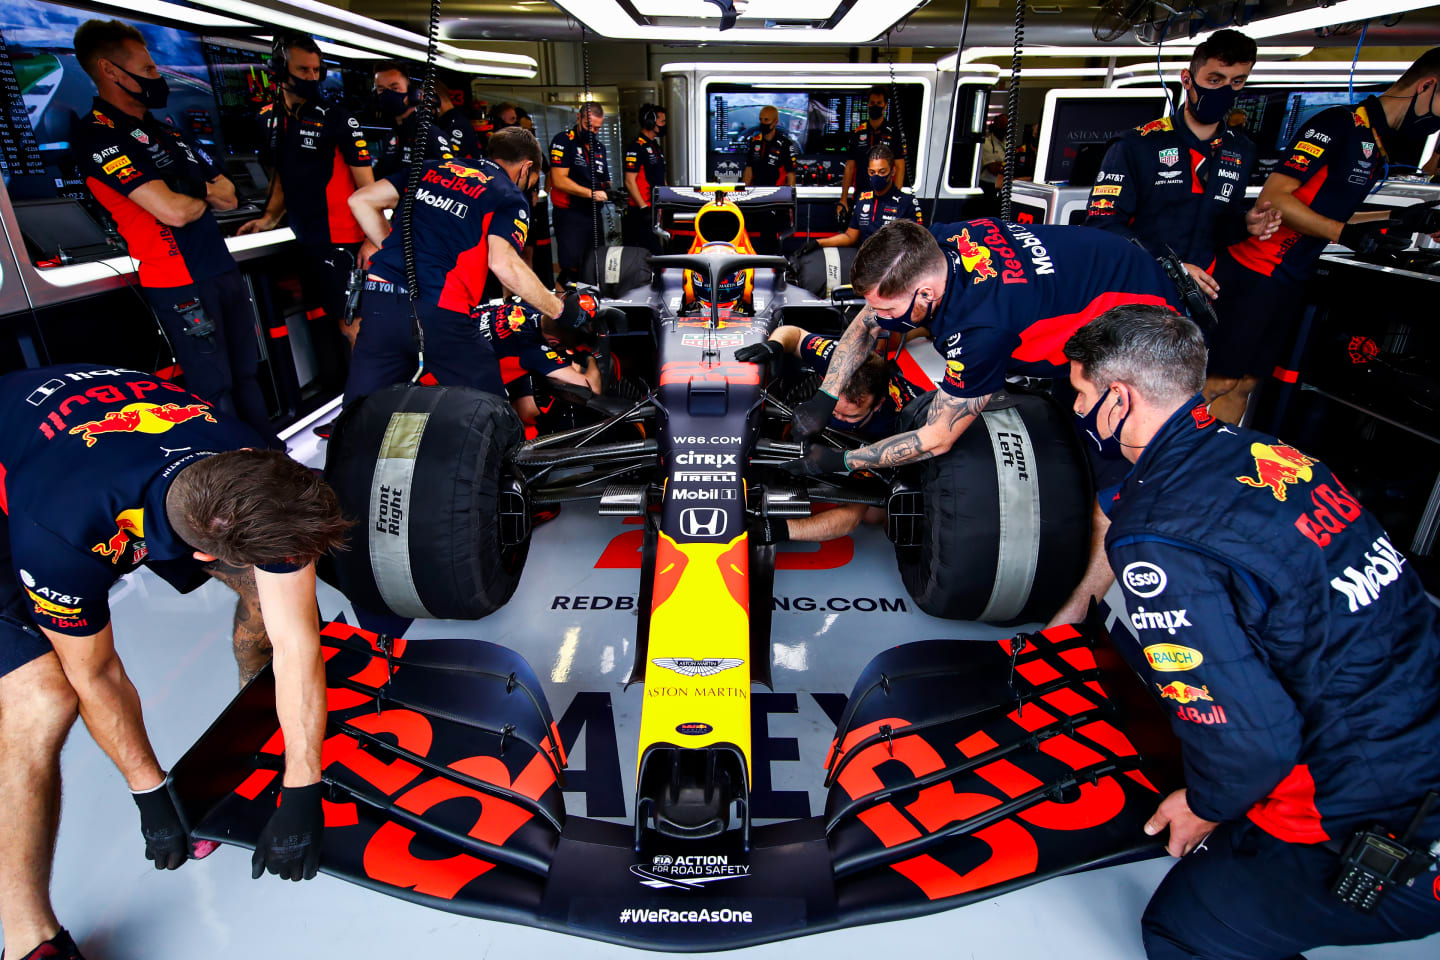 NORTHAMPTON, ENGLAND - AUGUST 01: The Red Bull Racing team work on the car of Alexander Albon of Thailand and Red Bull Racing in the garage during final practice for the F1 Grand Prix of Great Britain at Silverstone on August 01, 2020 in Northampton, England. (Photo by Mark Thompson/Getty Images)